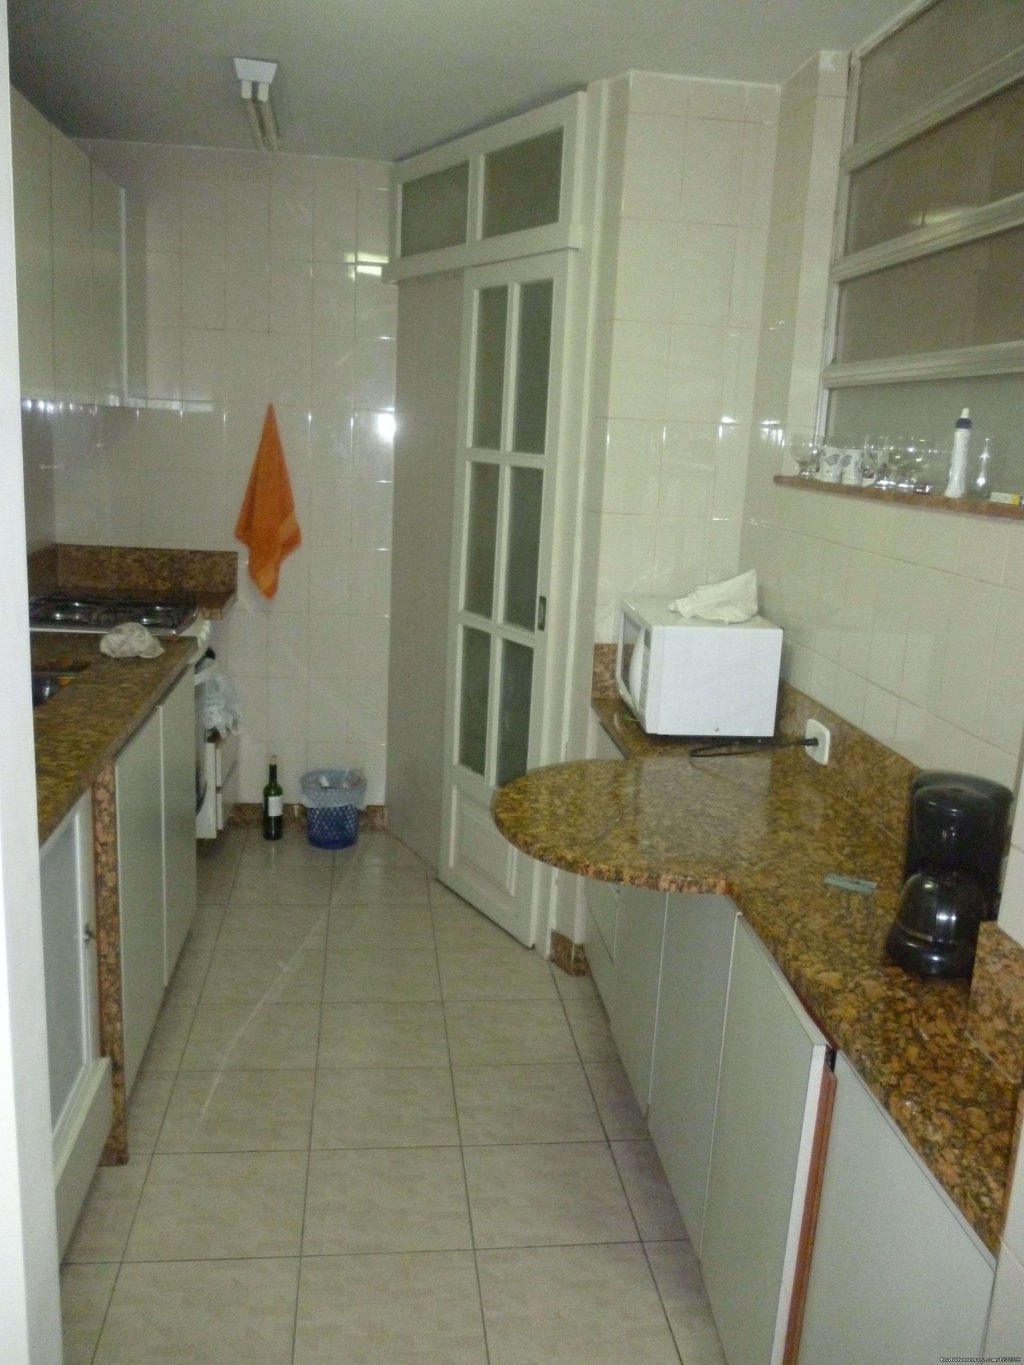 Huge Kitchen | New Years and Carnival | Rio de Janeiro, Brazil | Vacation Rentals | Image #1/4 | 